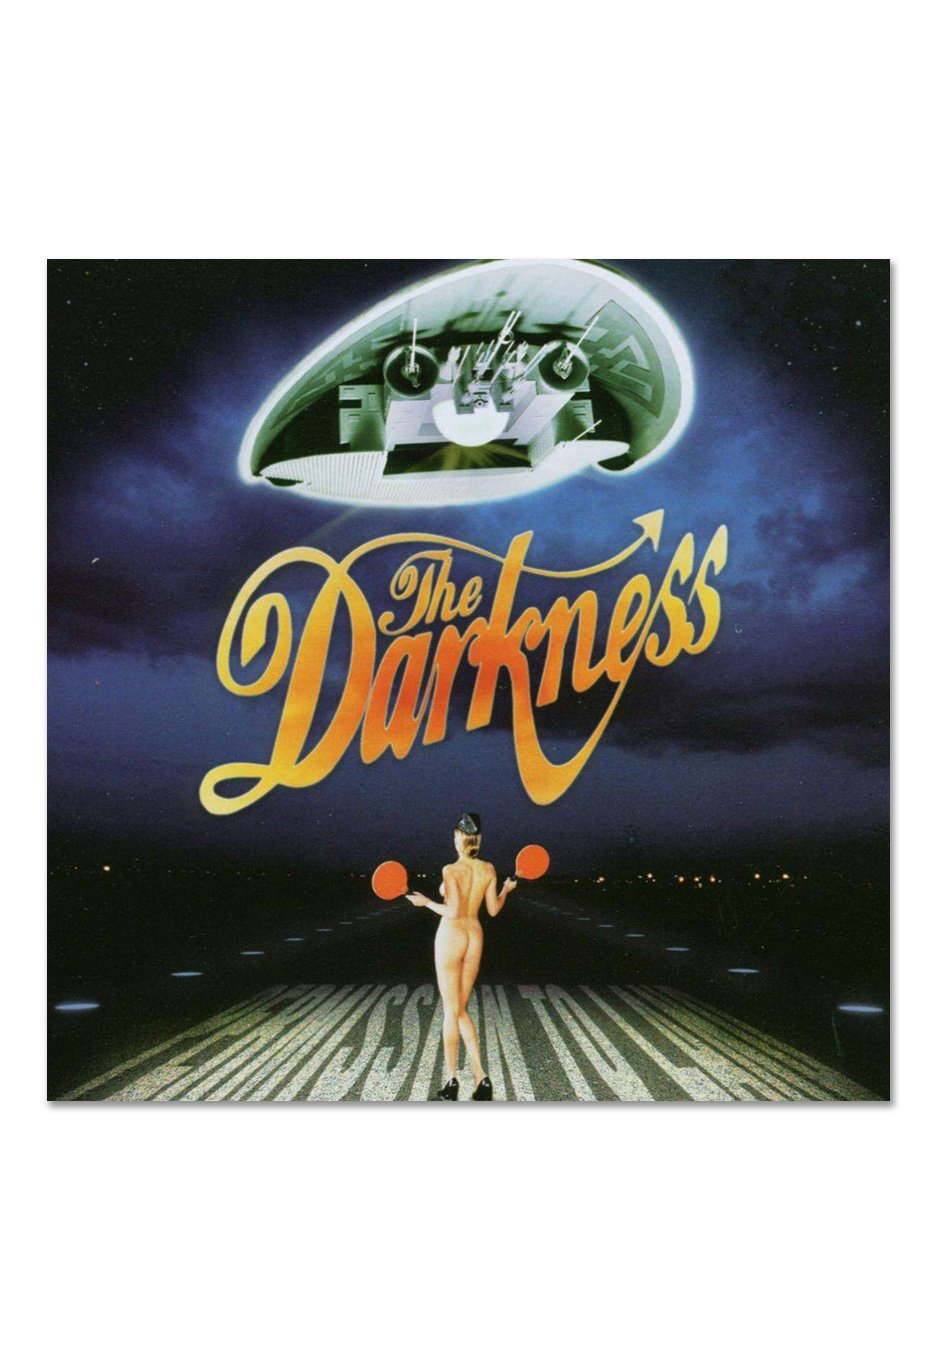 The Darkness - Permission To Land...Again (20th Anniversary) - 4 CD + DVD Mediabook